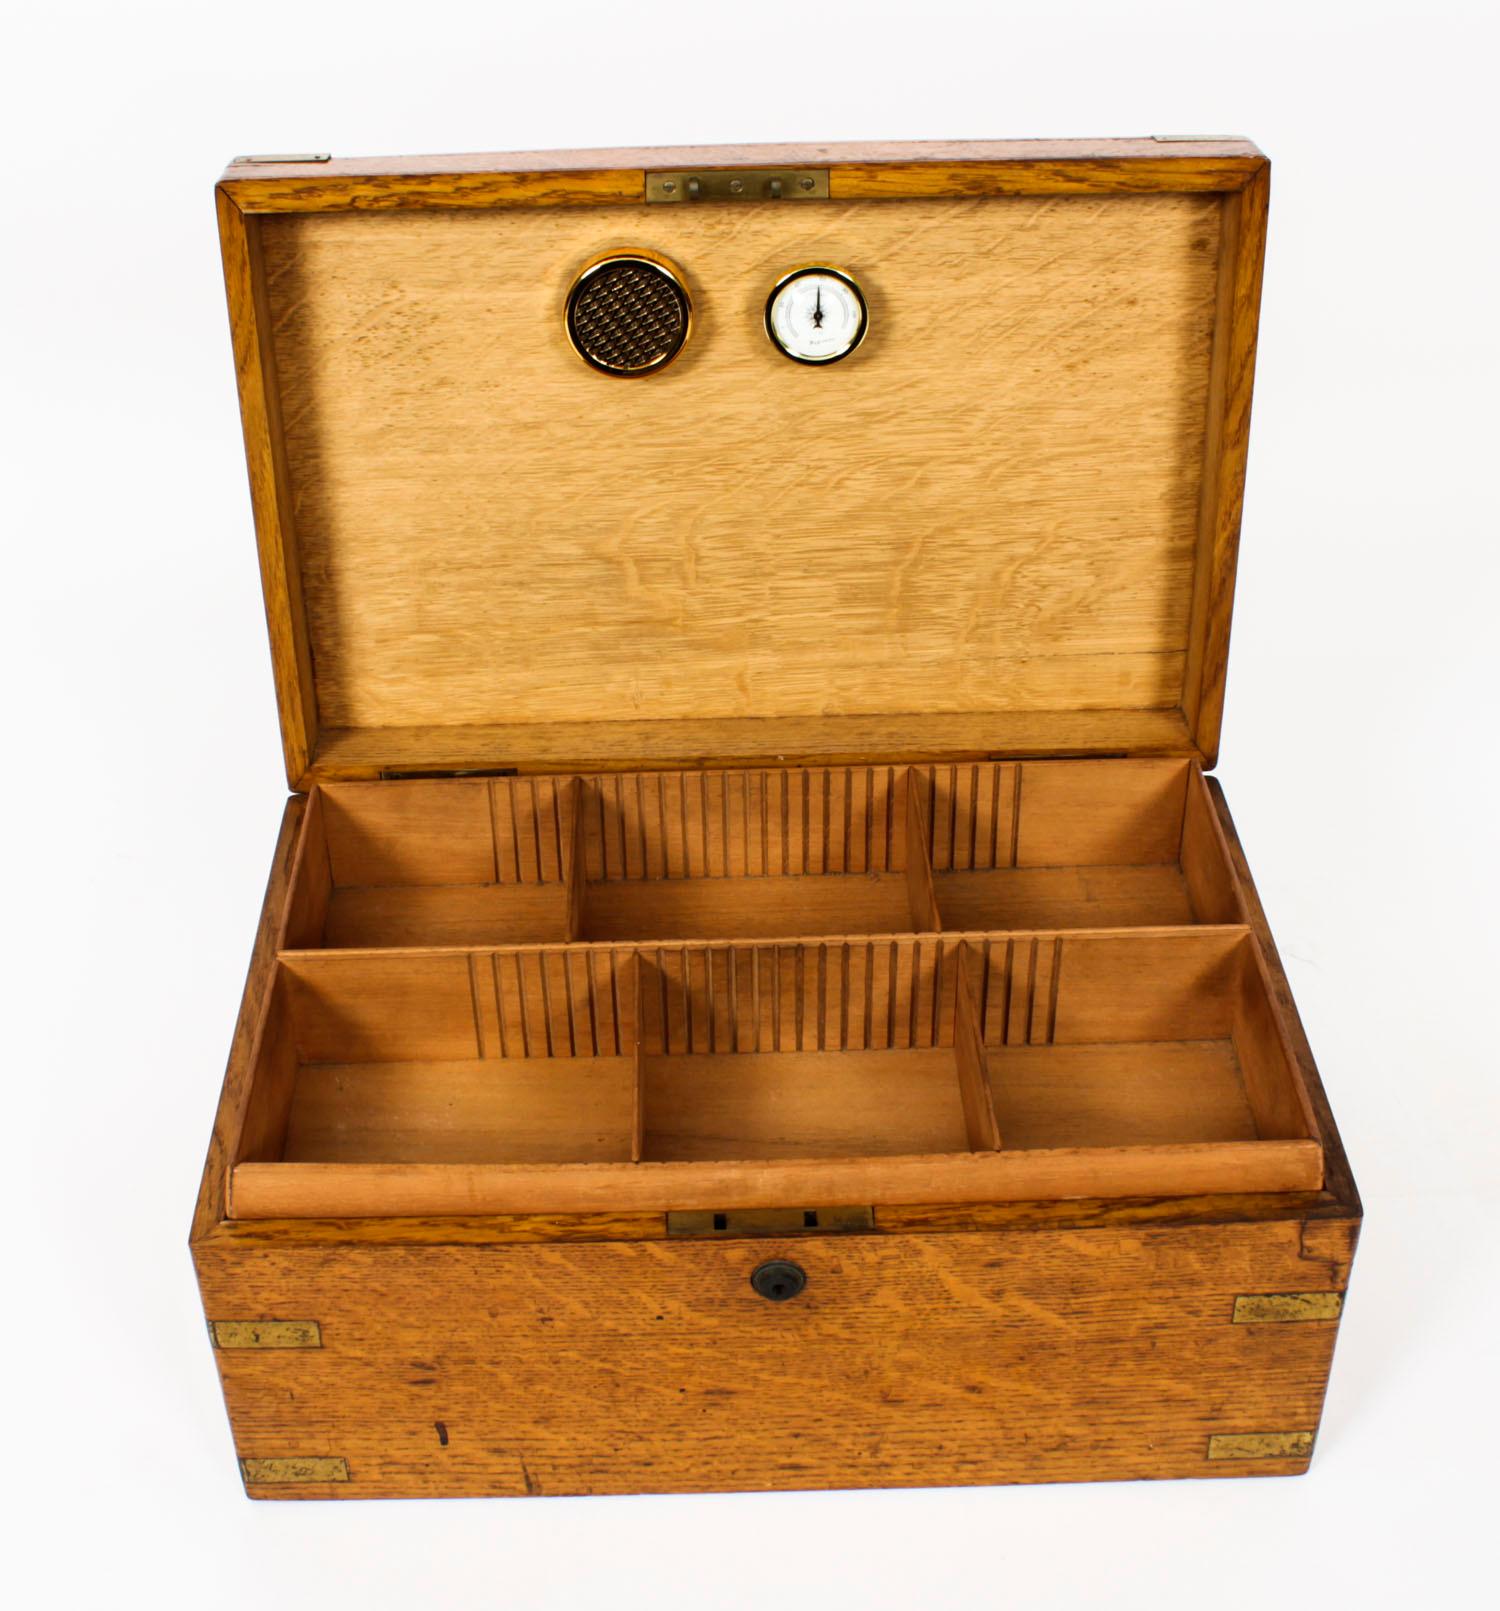 This is a stylish antique Victorian oak brass and cedar lined tabletop cigar humidor circa 1860 in date.

The rectangular box features a lift out tray and adjustable divisions with sunken handles to the sides and a hinged lid with a central brass